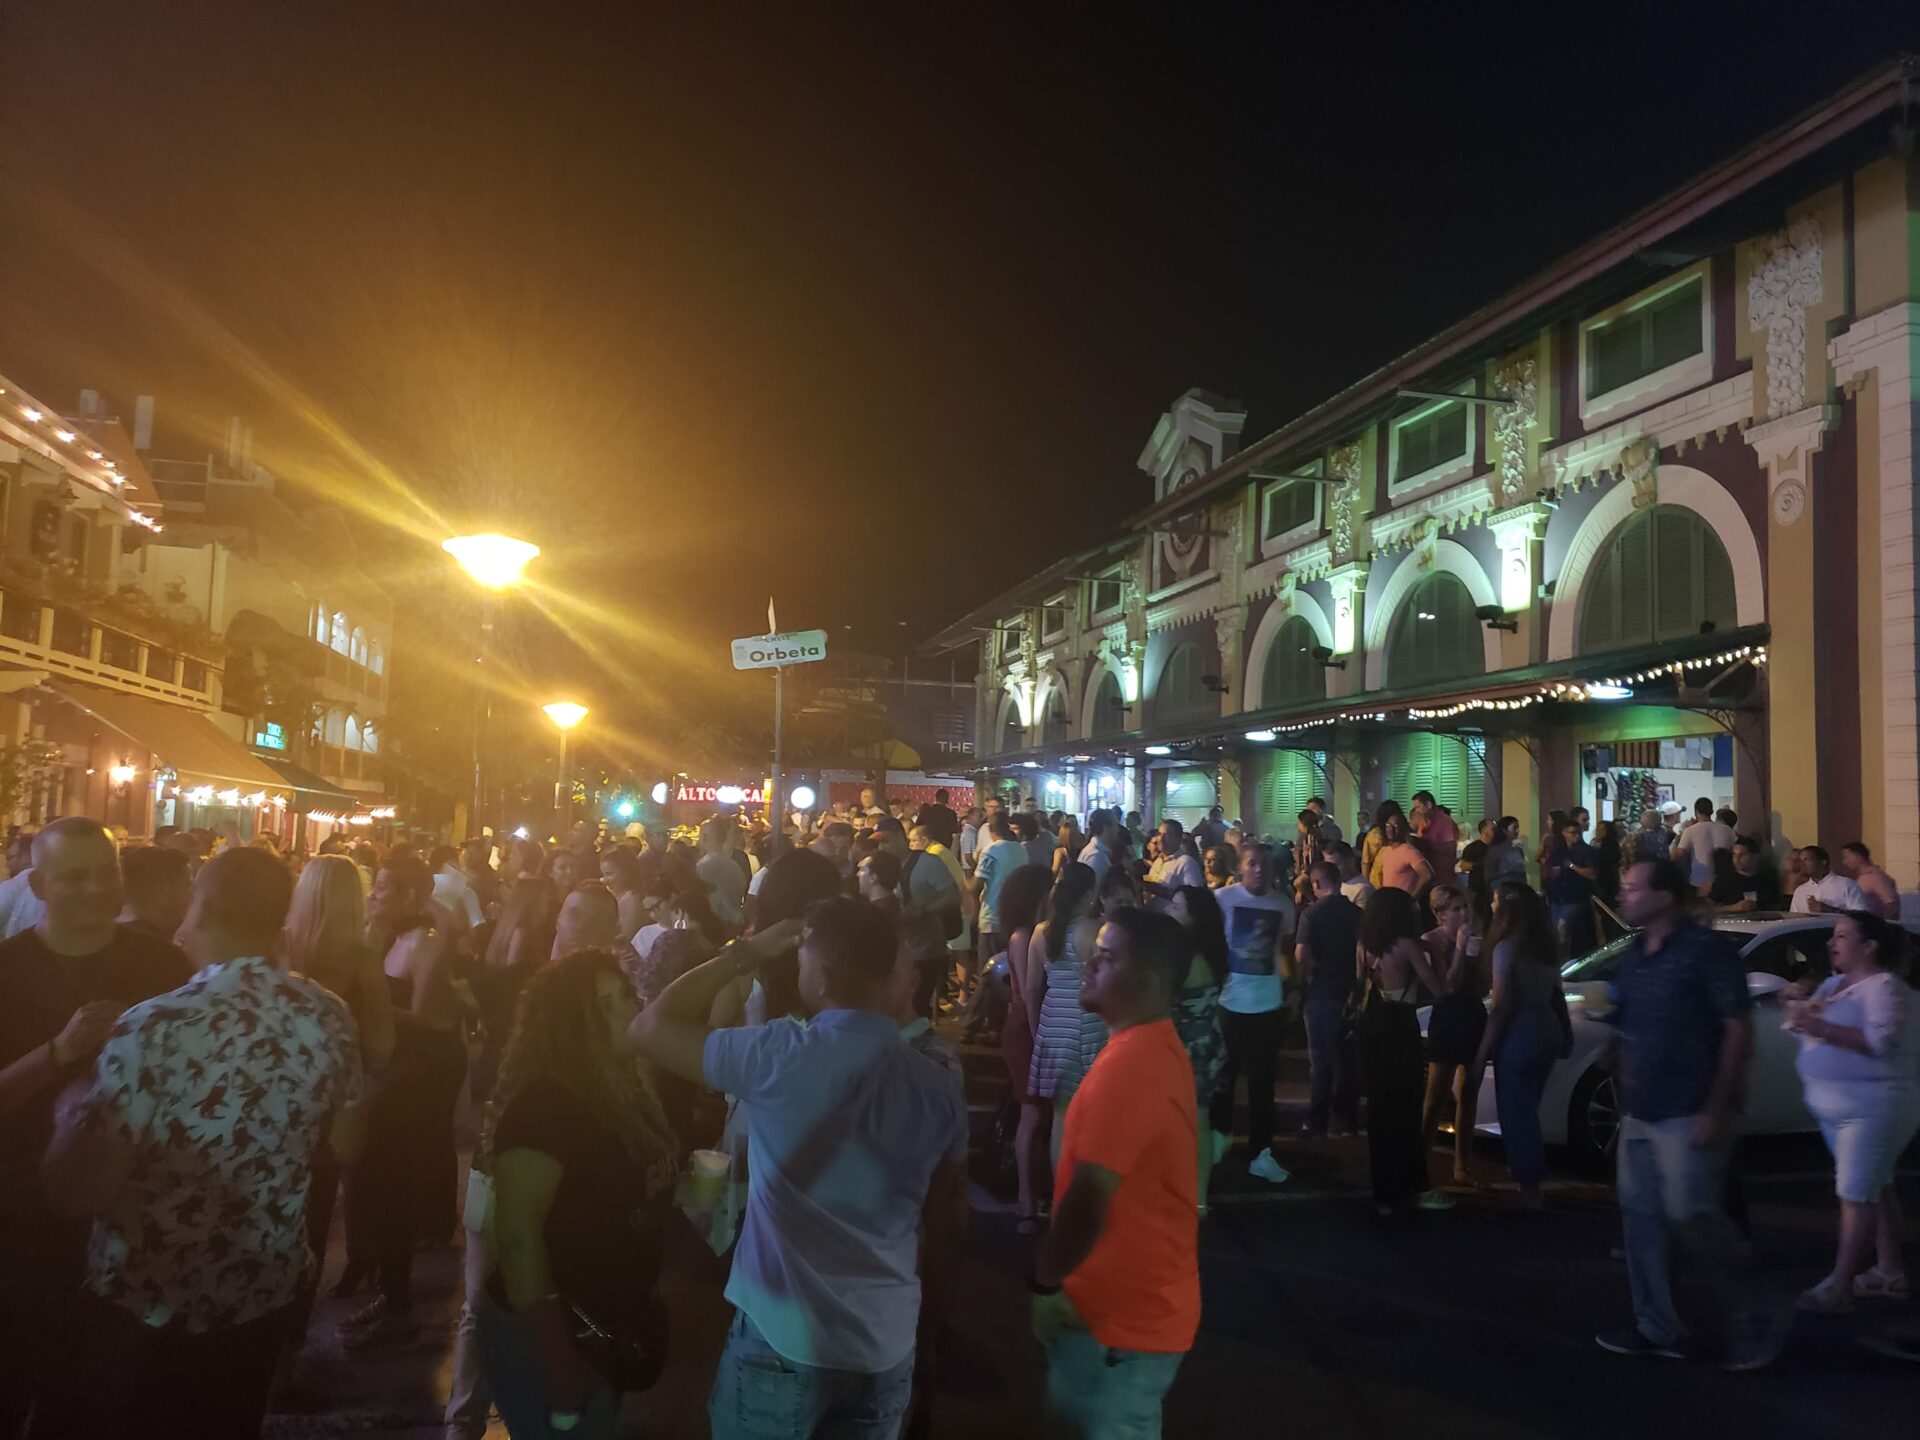 a crowd of people outside at night